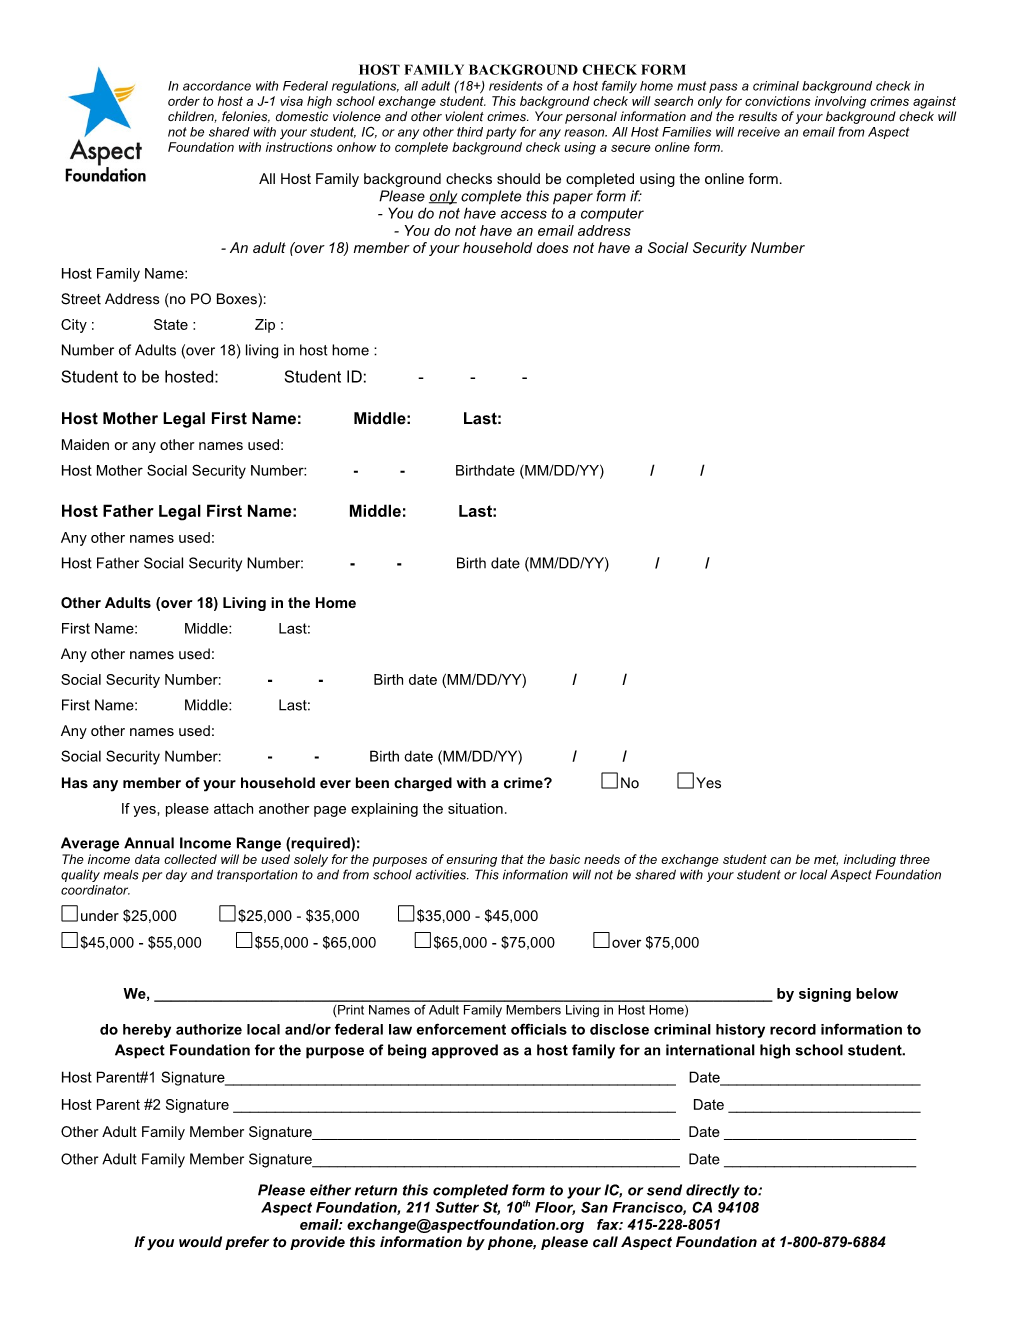 Host Family Background Check Form